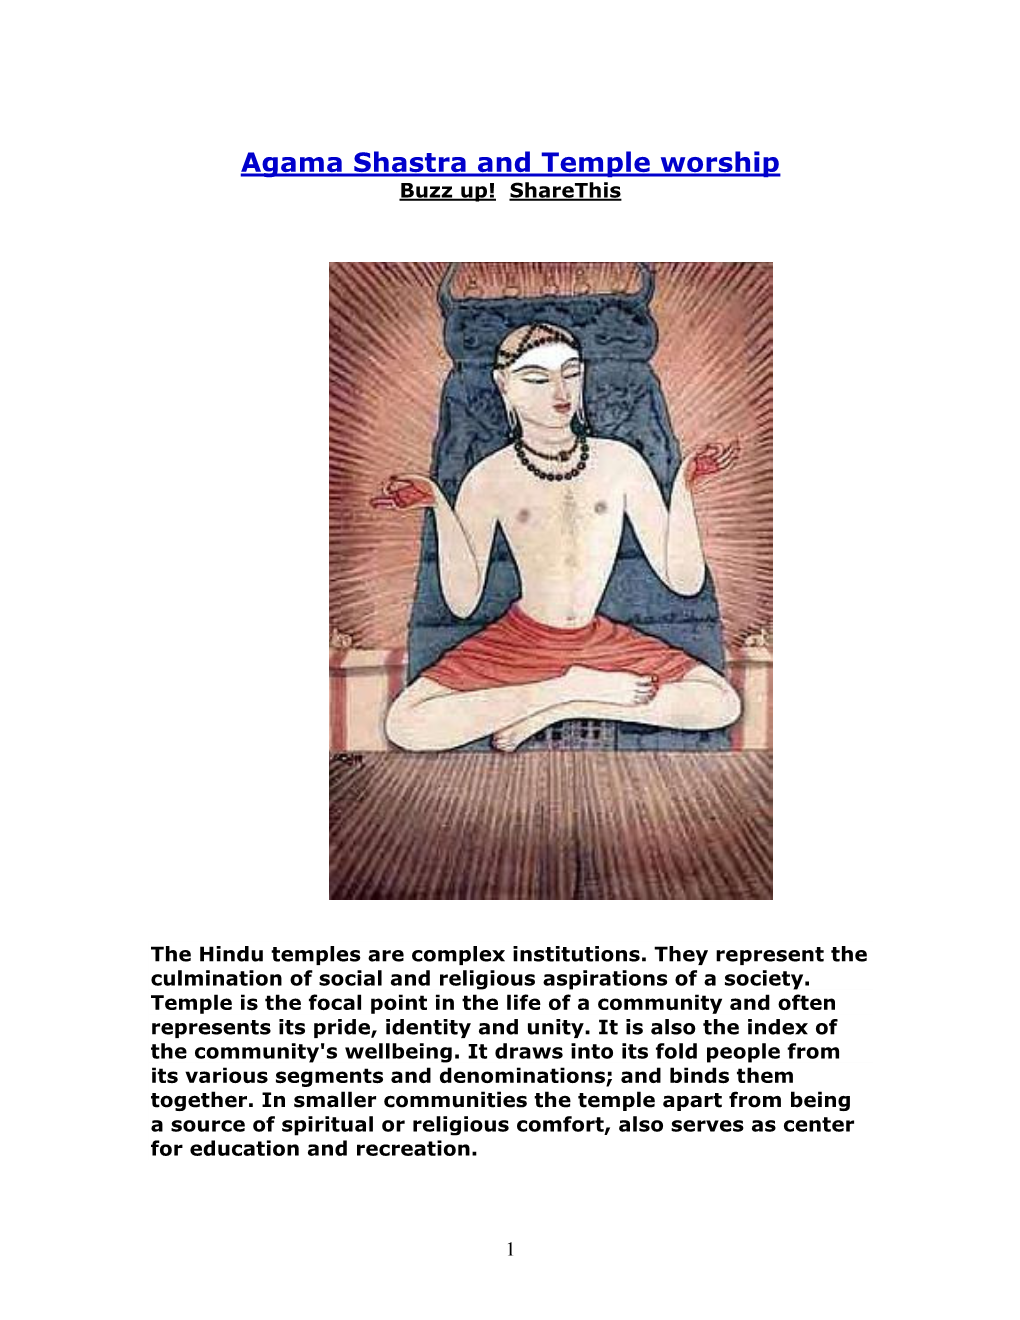 Agama Shastra and Temple Worship Buzz Up! Sharethis